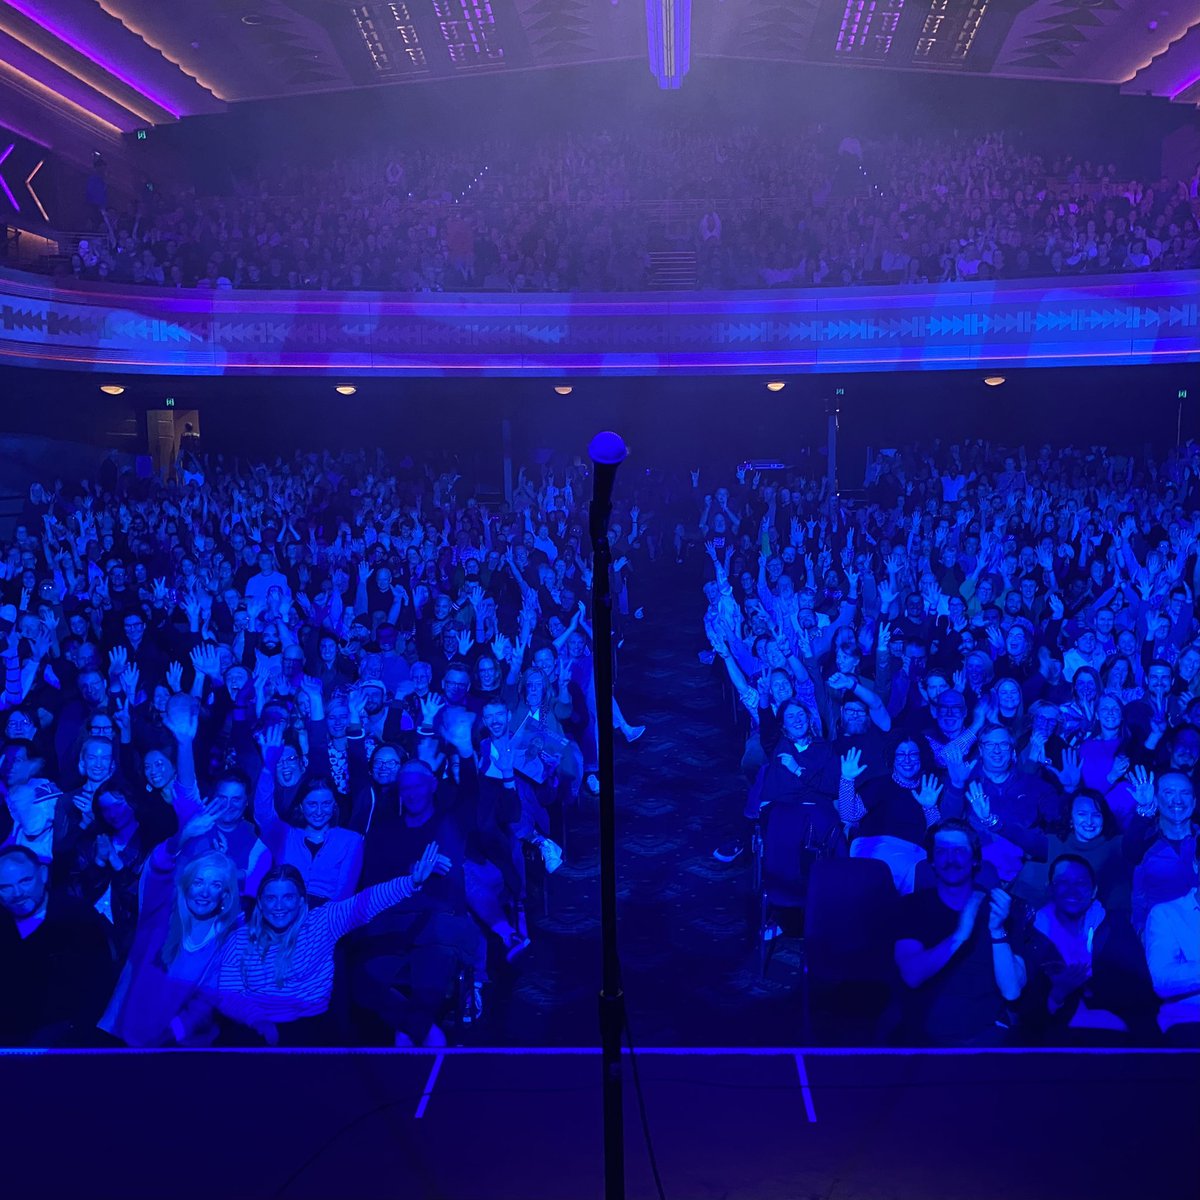 SYDNEY! Thanks for the huge SOLD OUT Enmore show! Absolutely loved it. (Can you spot the Cosby album?) Sutherland is SOLD OUT too. Tomorrow’s Enmore show TIX AVAILABLE. It’s your last chance Sydney, don’t miss out!